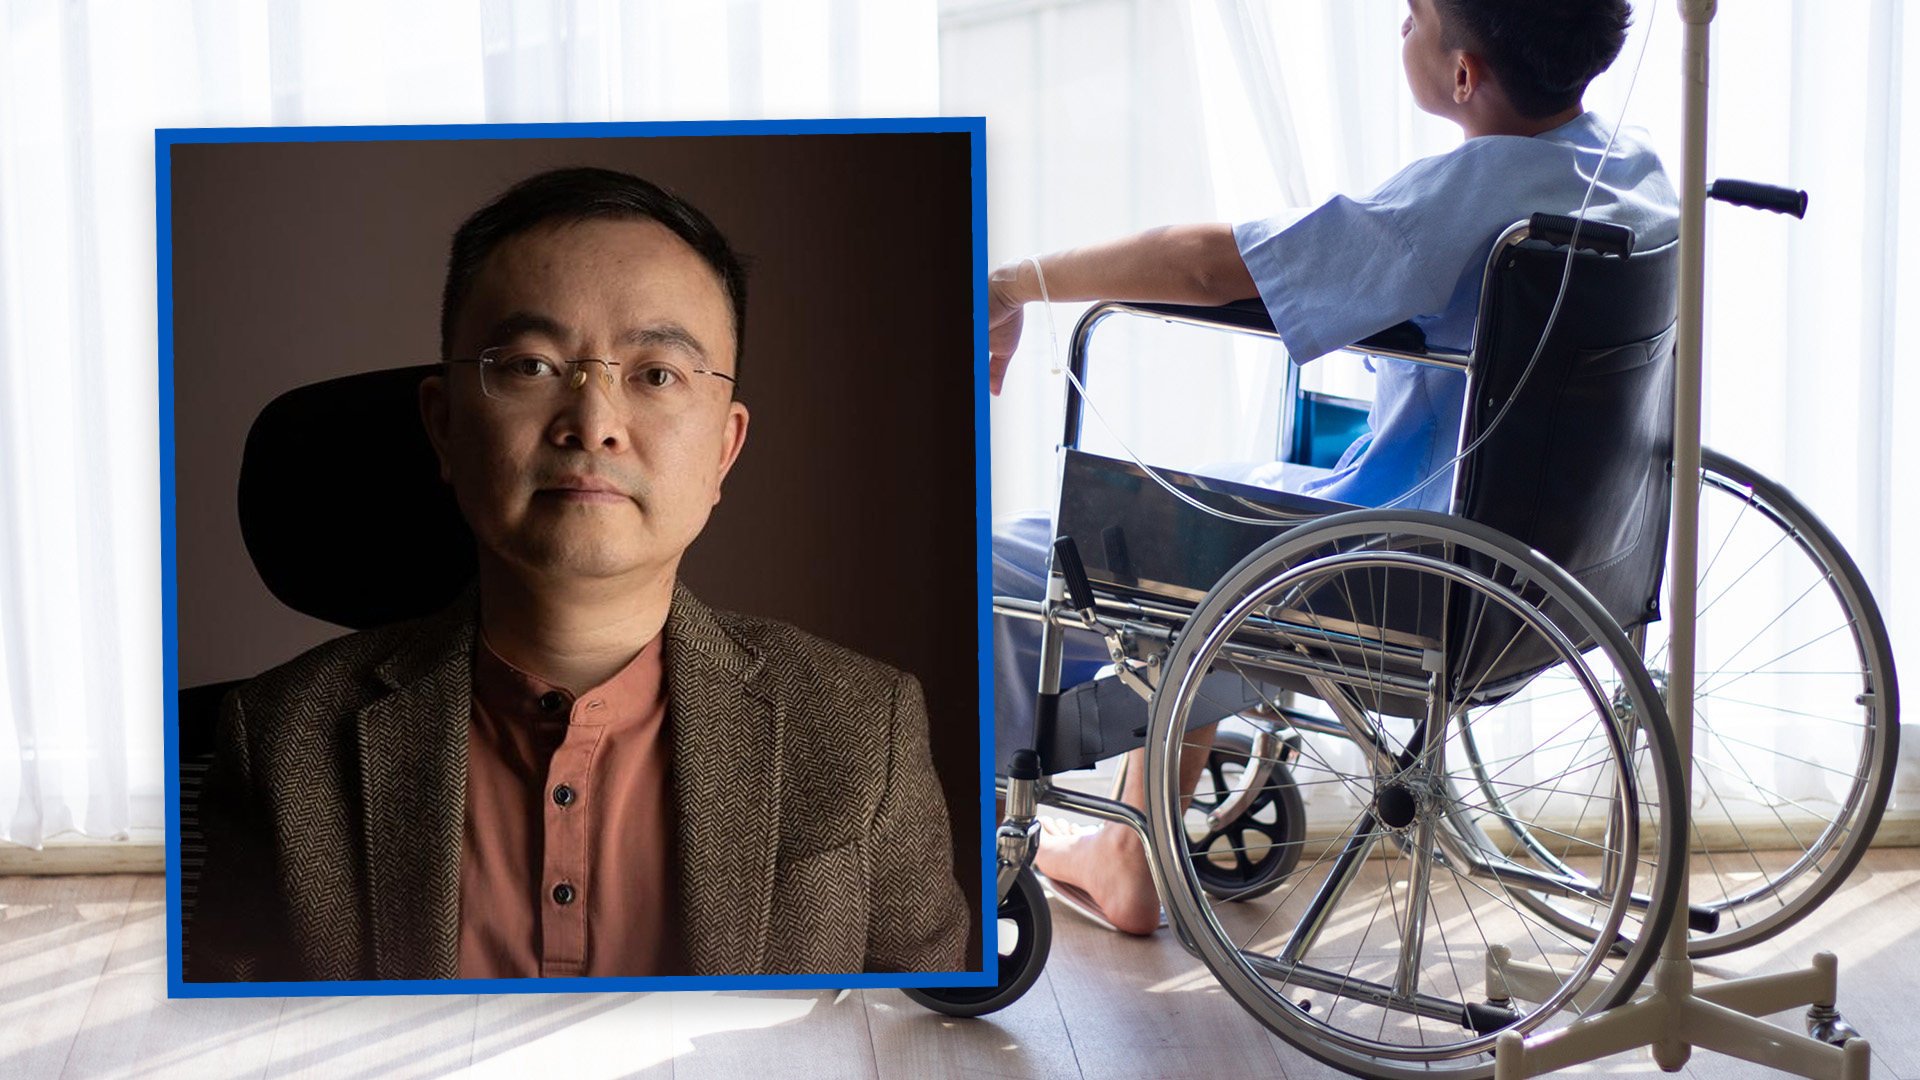 A former e-commerce tycoon in China who has been diagnosed with an incurable brain disease has vowed to save a million people like him before he dies. Photo: SCMP composite/Shutterstock/36Kr.com